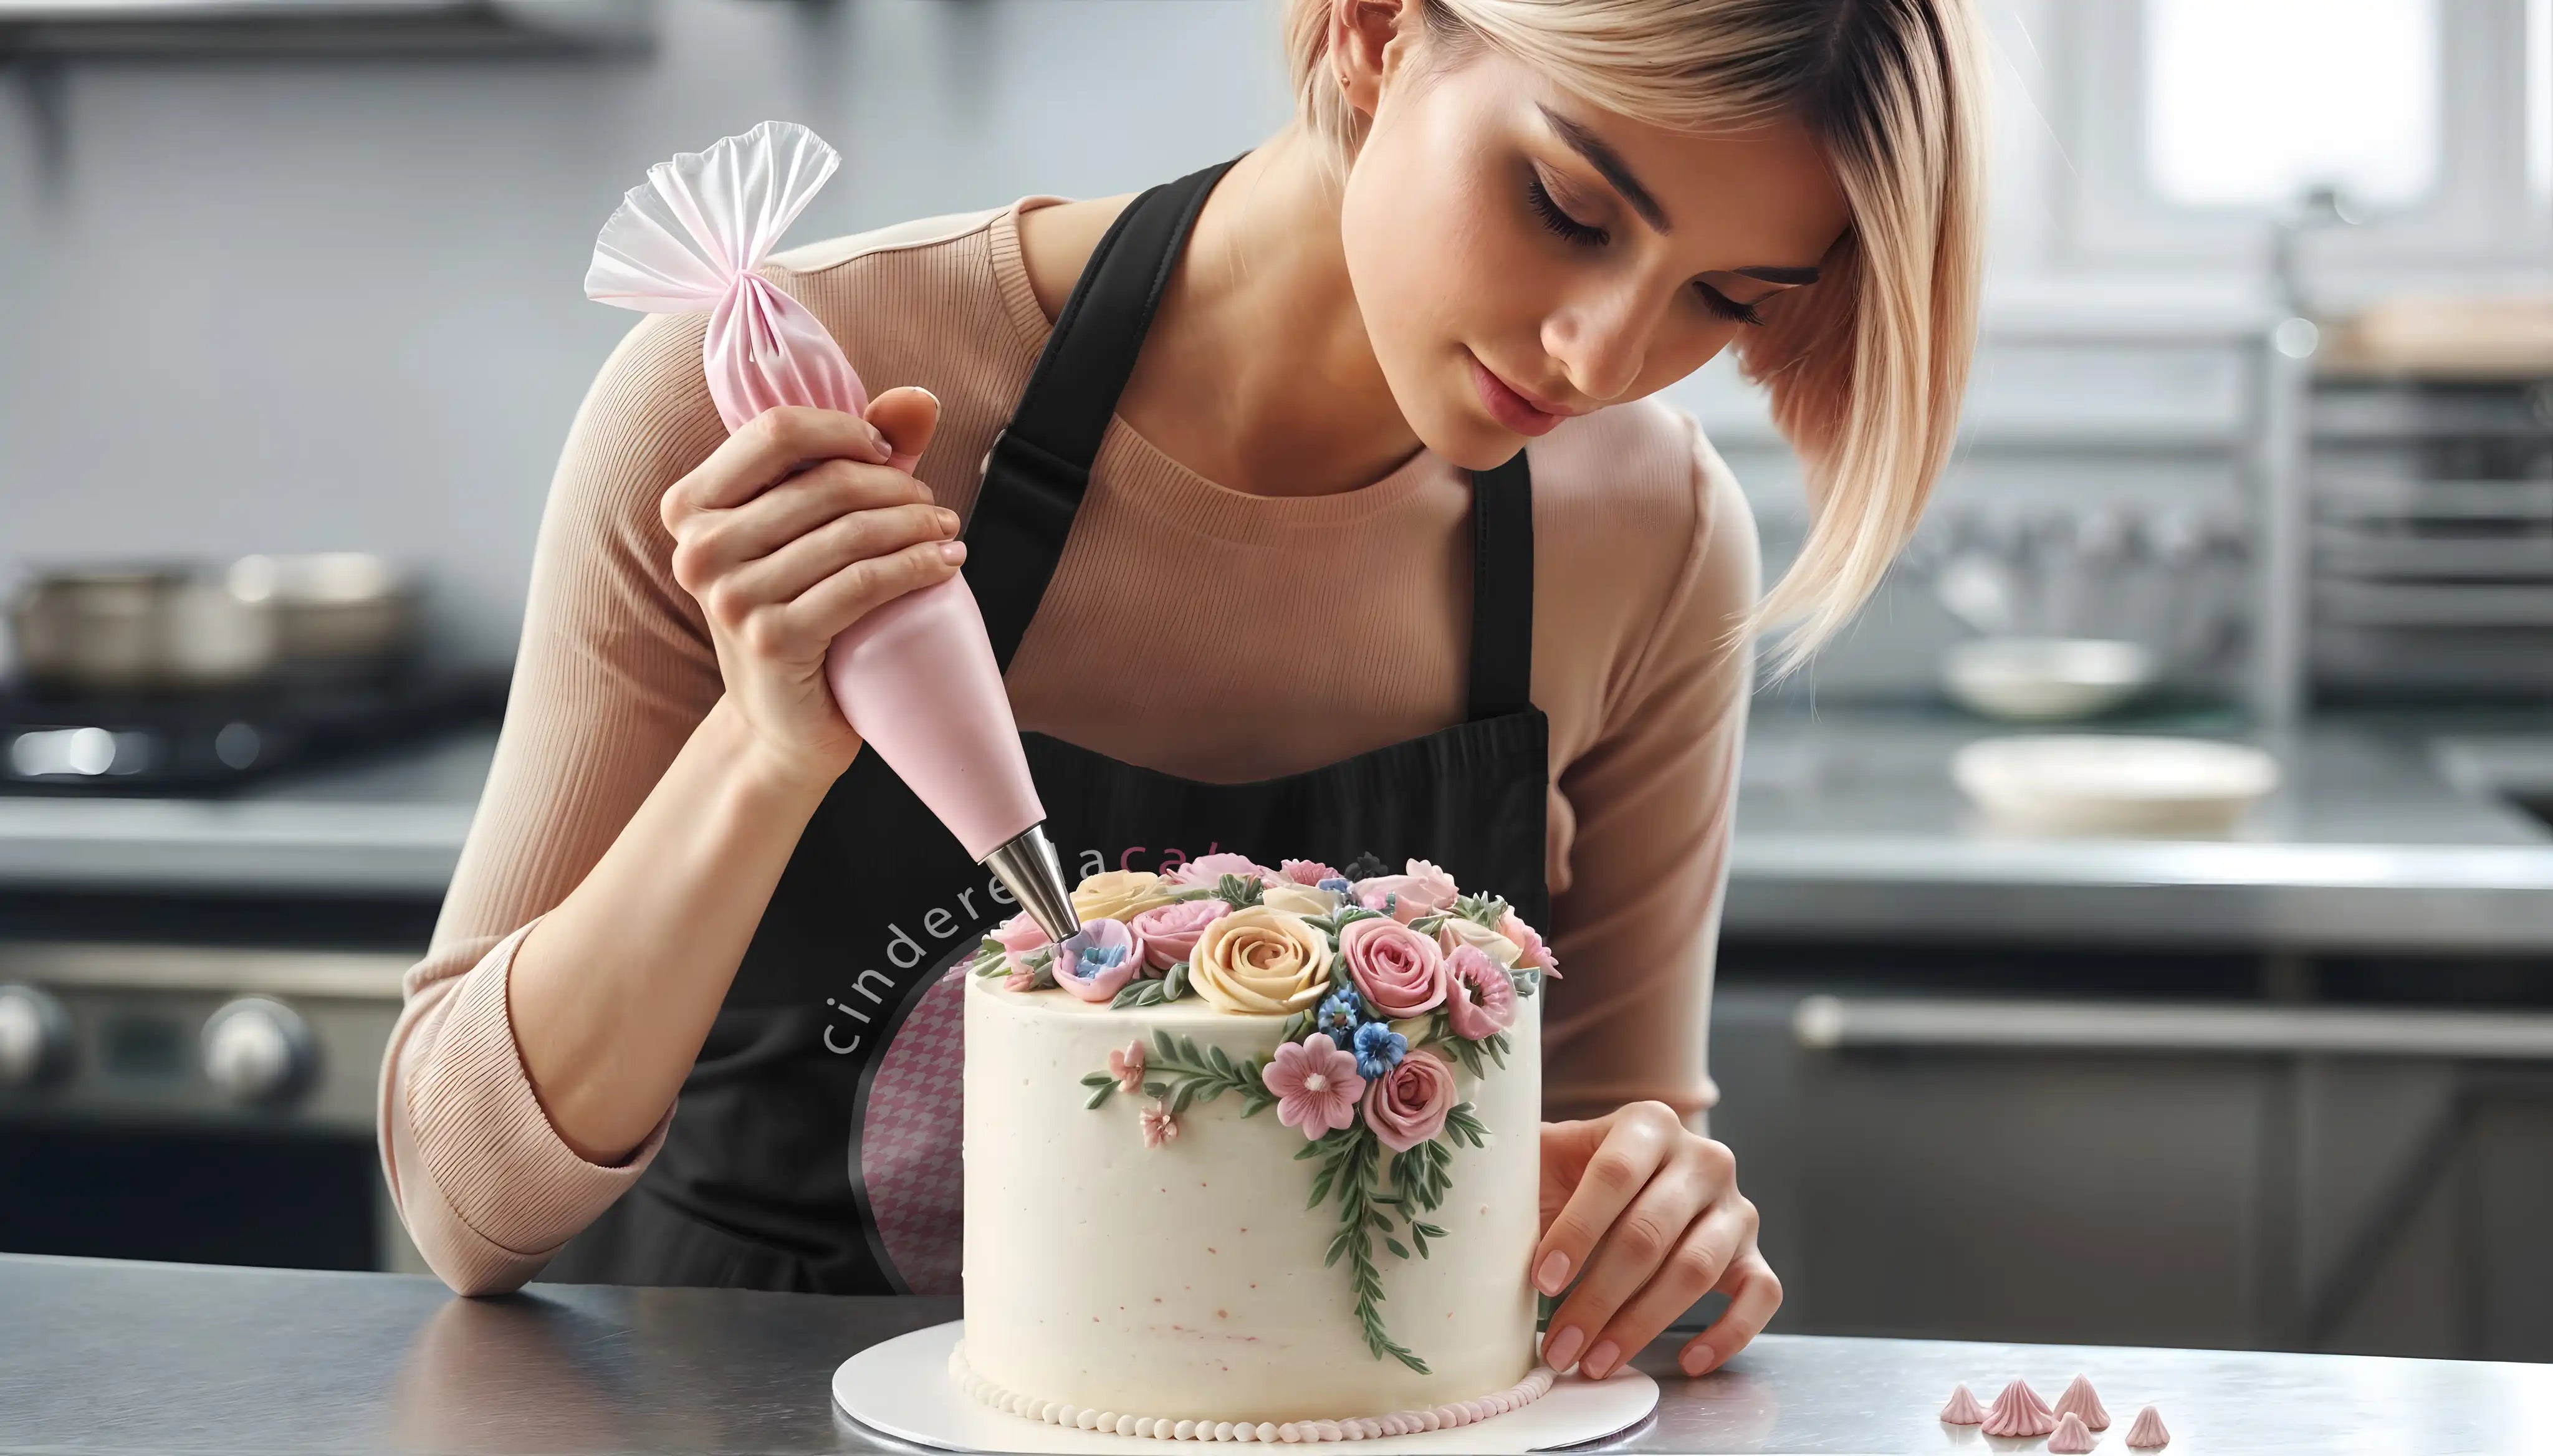 Lady | Cakes for women, Girly cakes, Candy birthday cakes